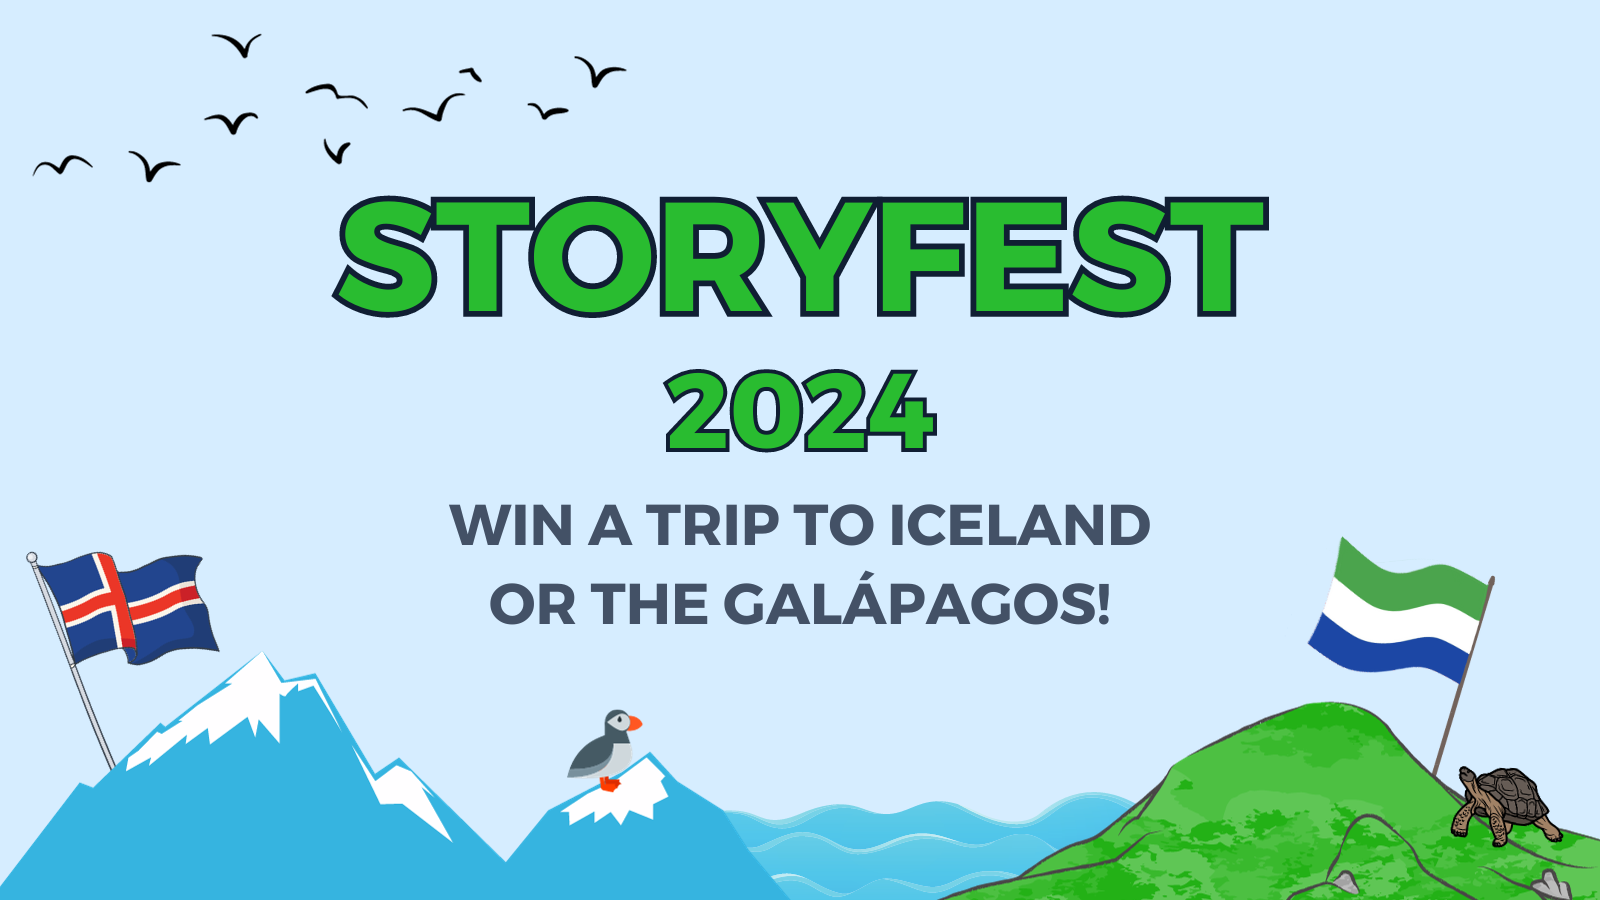 Storyfest: Tell an inspiring story to move the Planet Forward